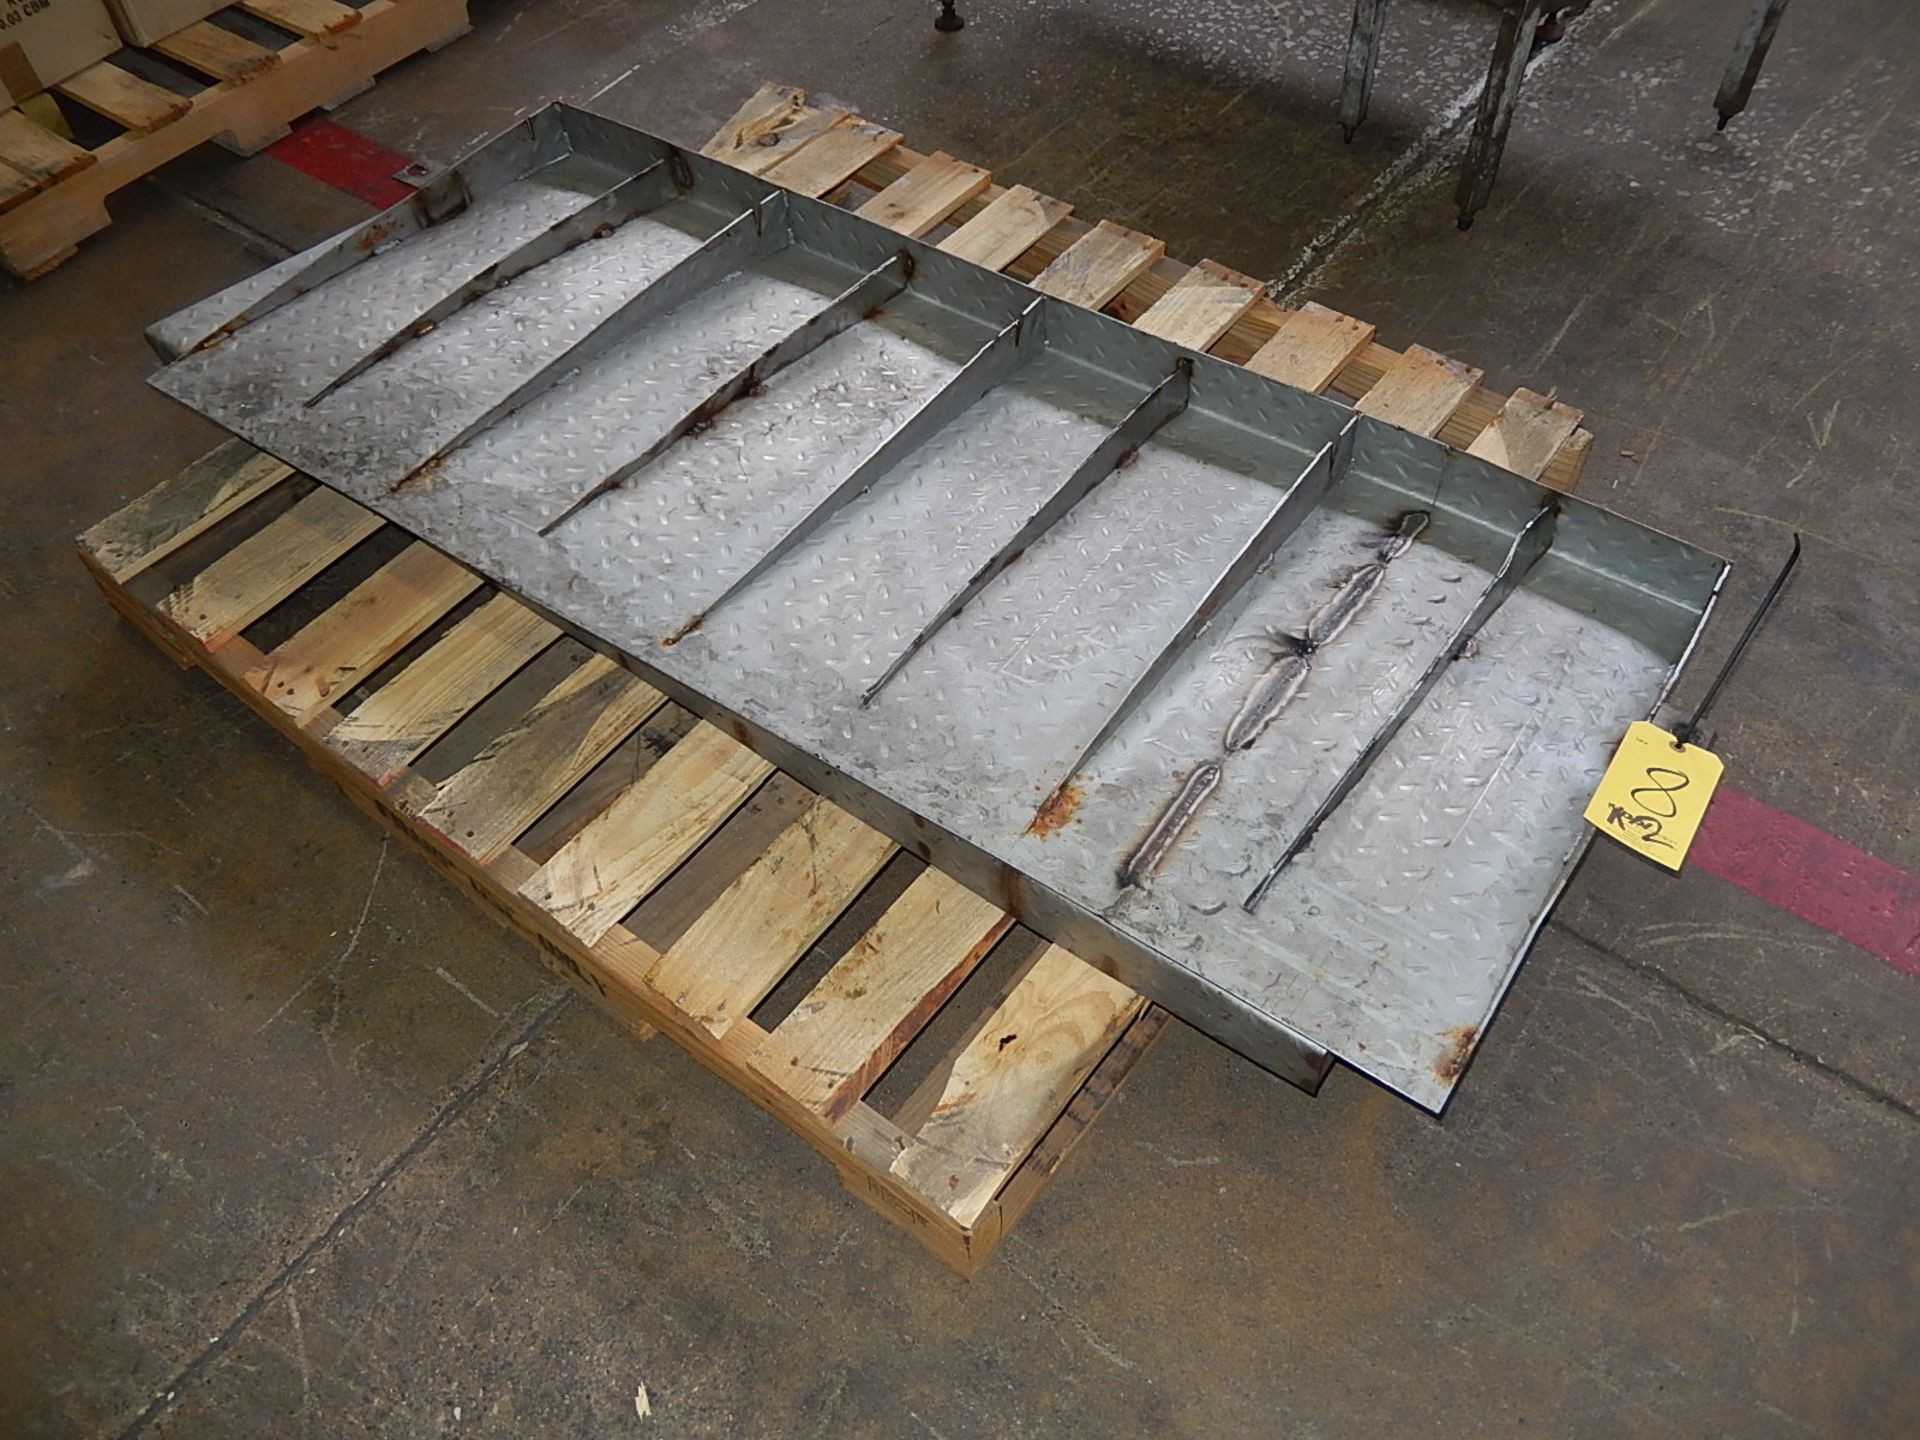 LOT: (2) Stainless Steel Ramps, 60 in. x 25 in. x 3 in. High